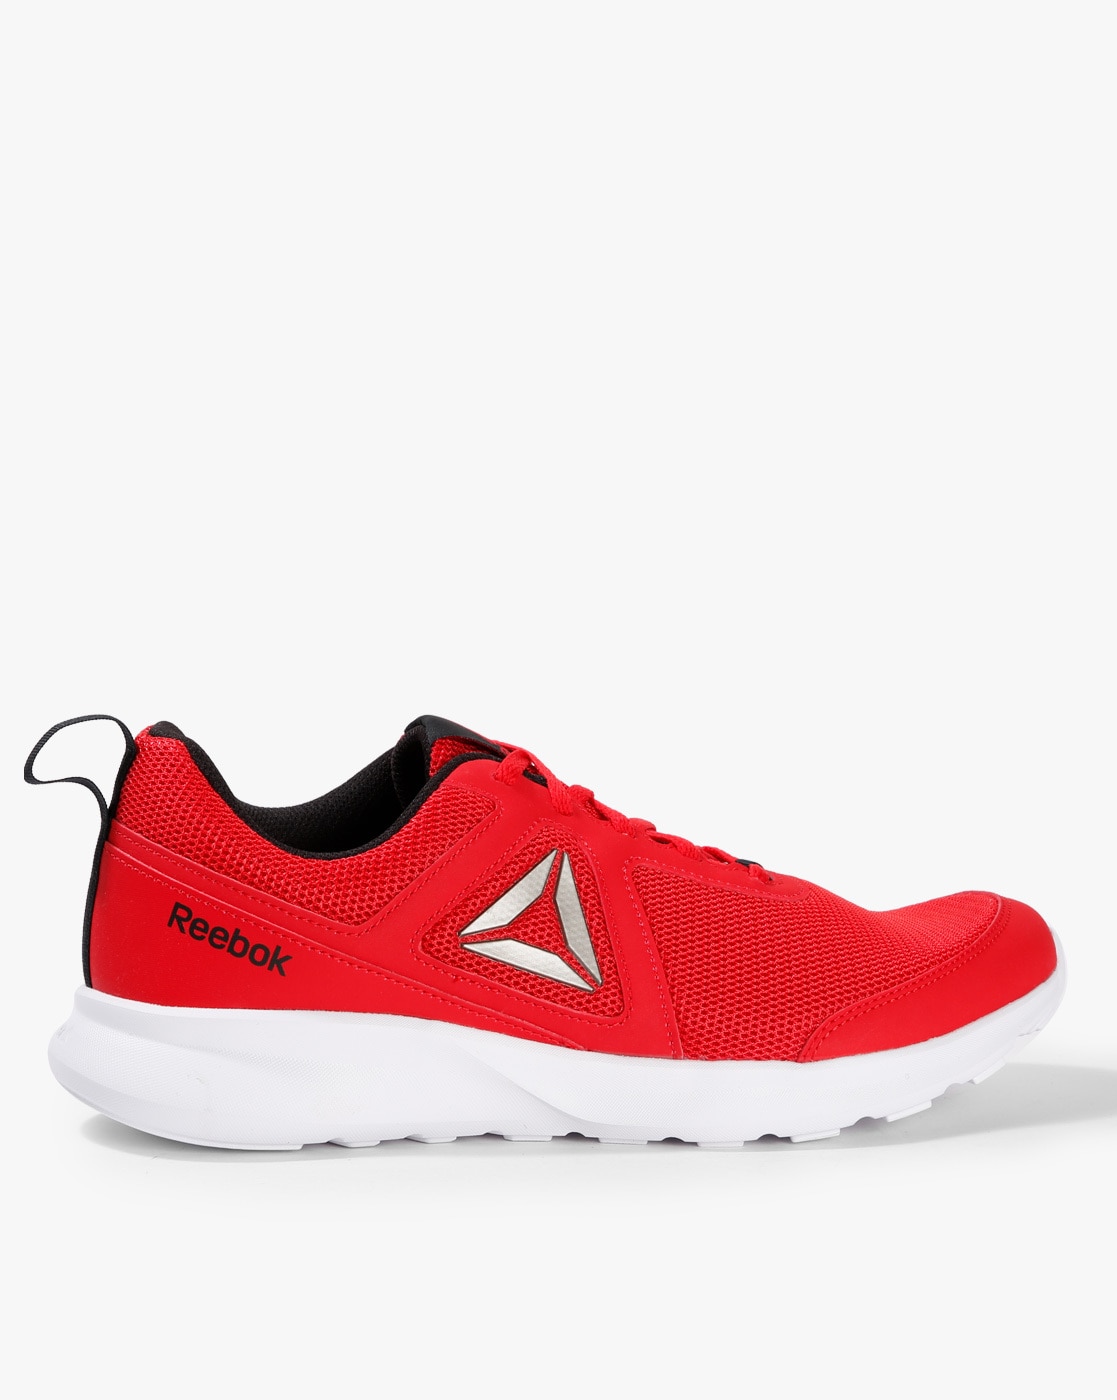 reebok red shoes online